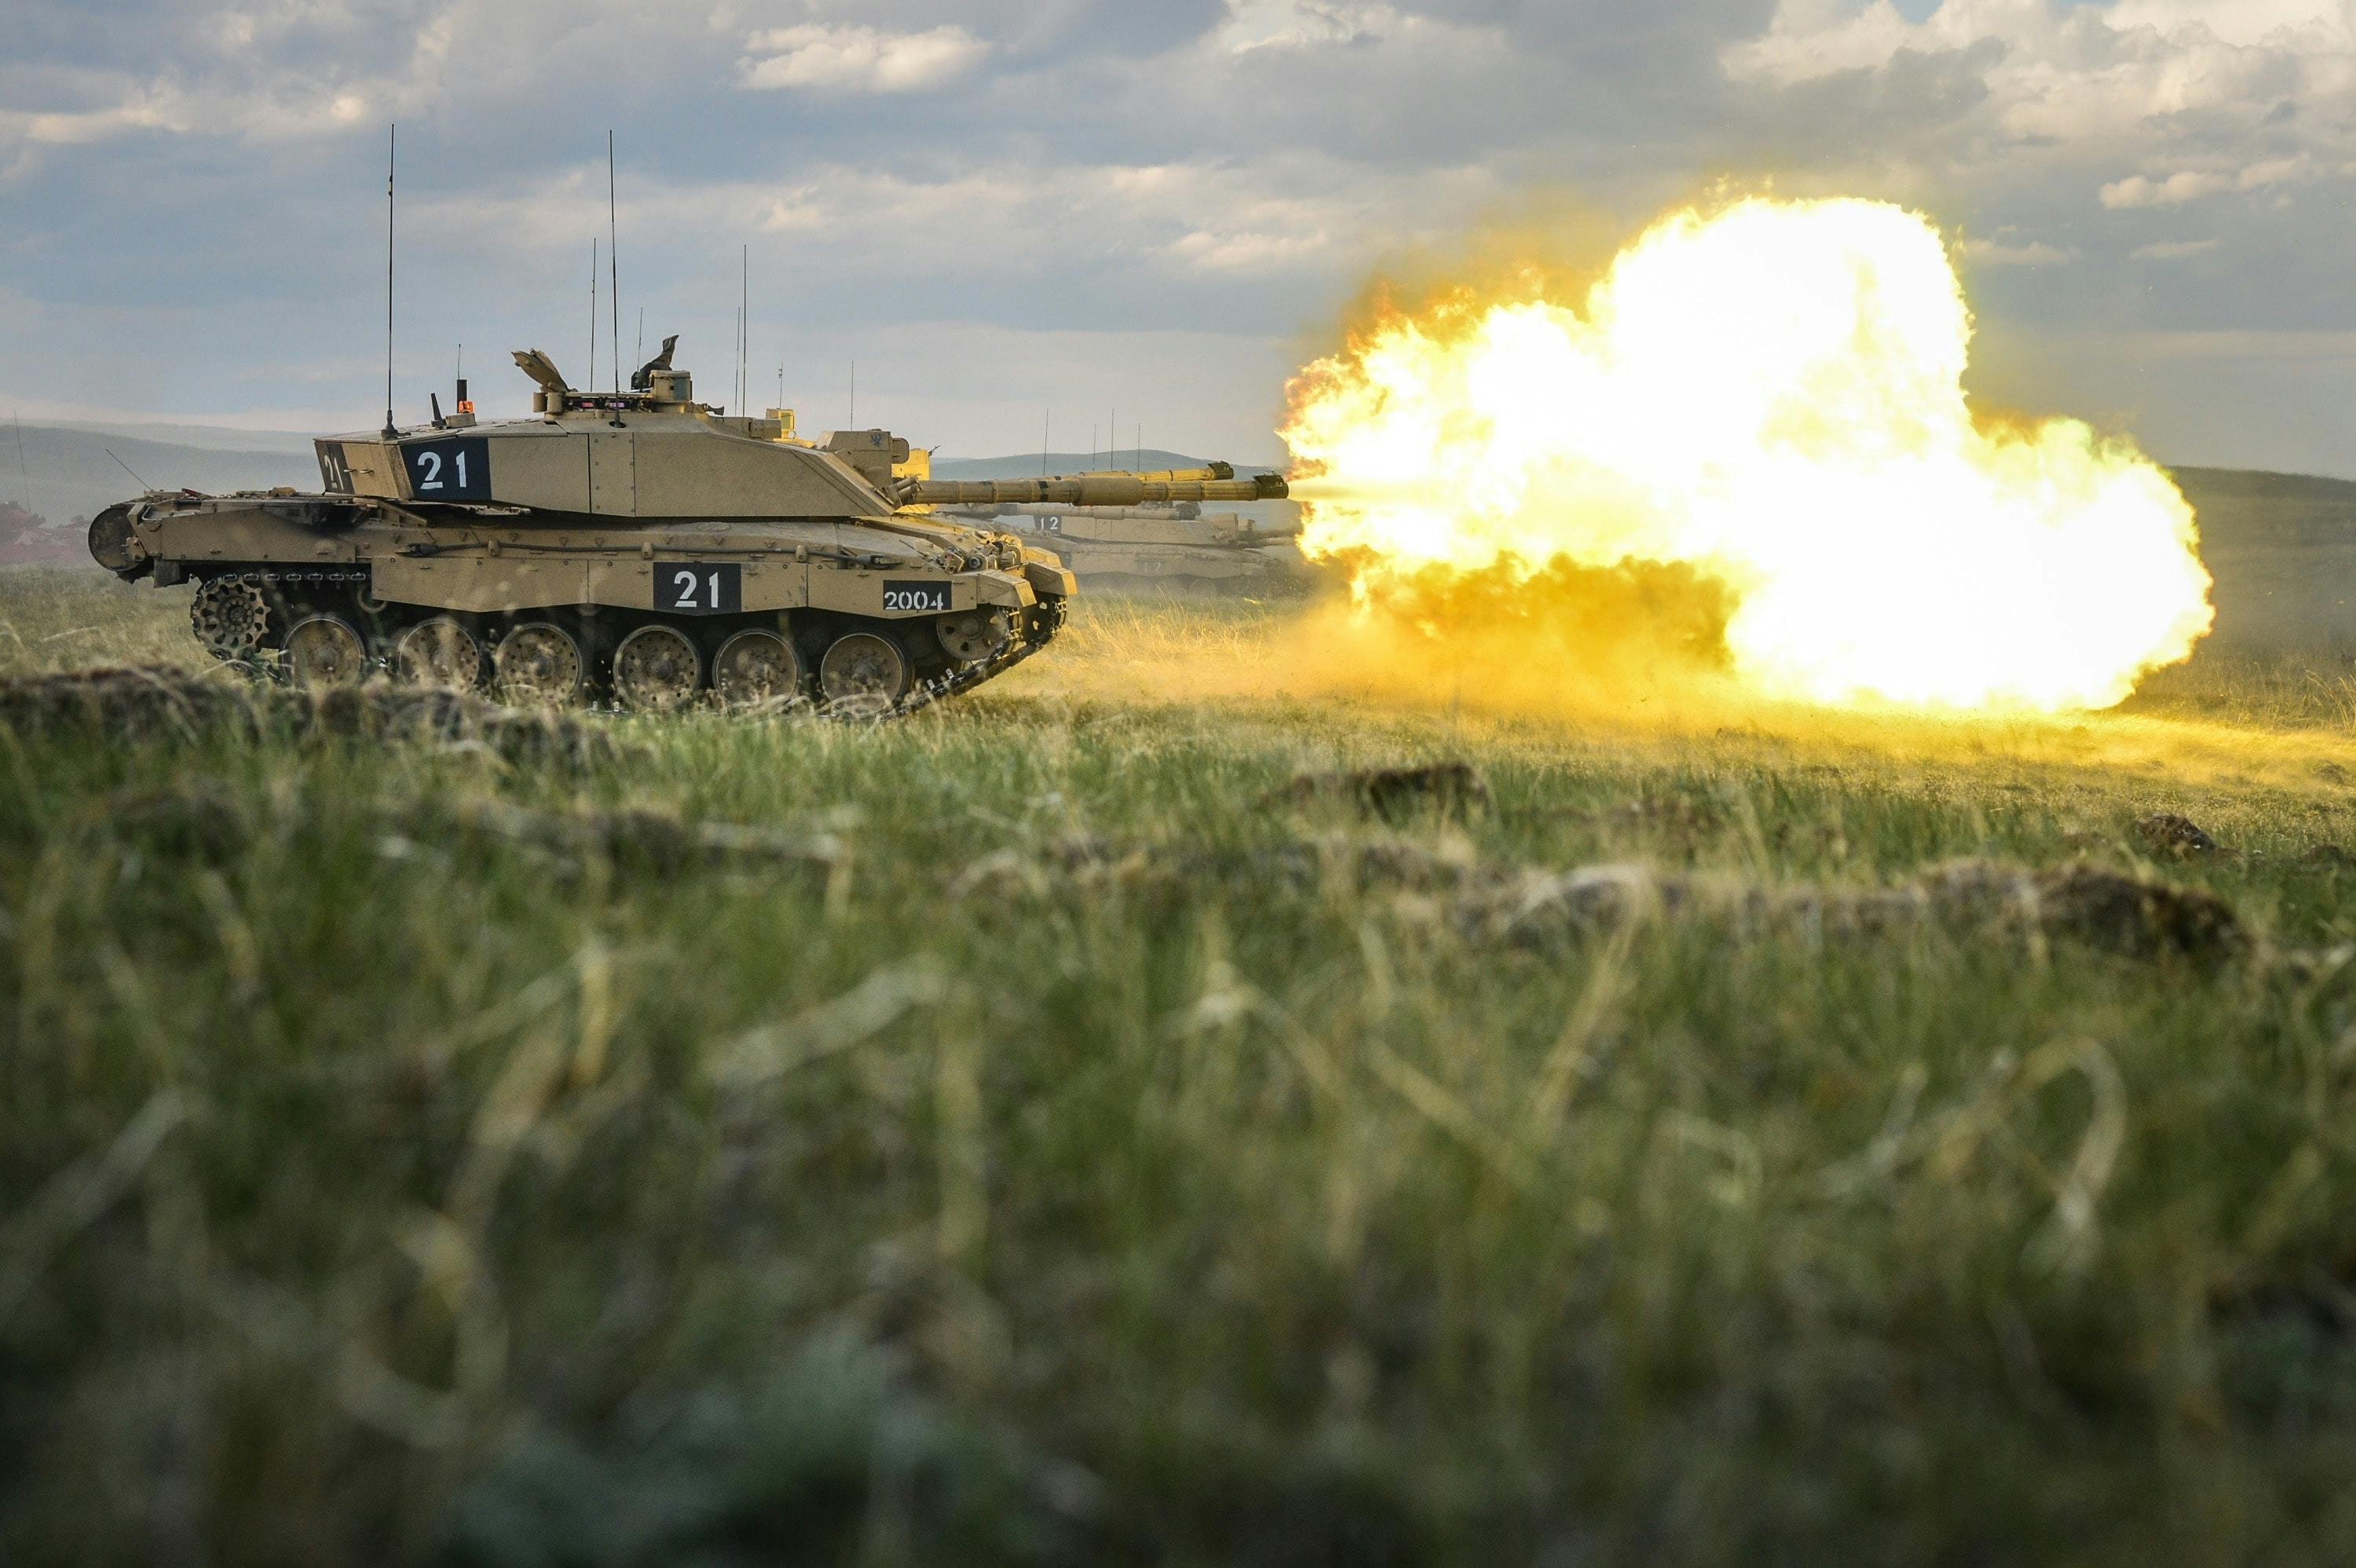 Challenger 2 Life Extension Programme decision due late 2020